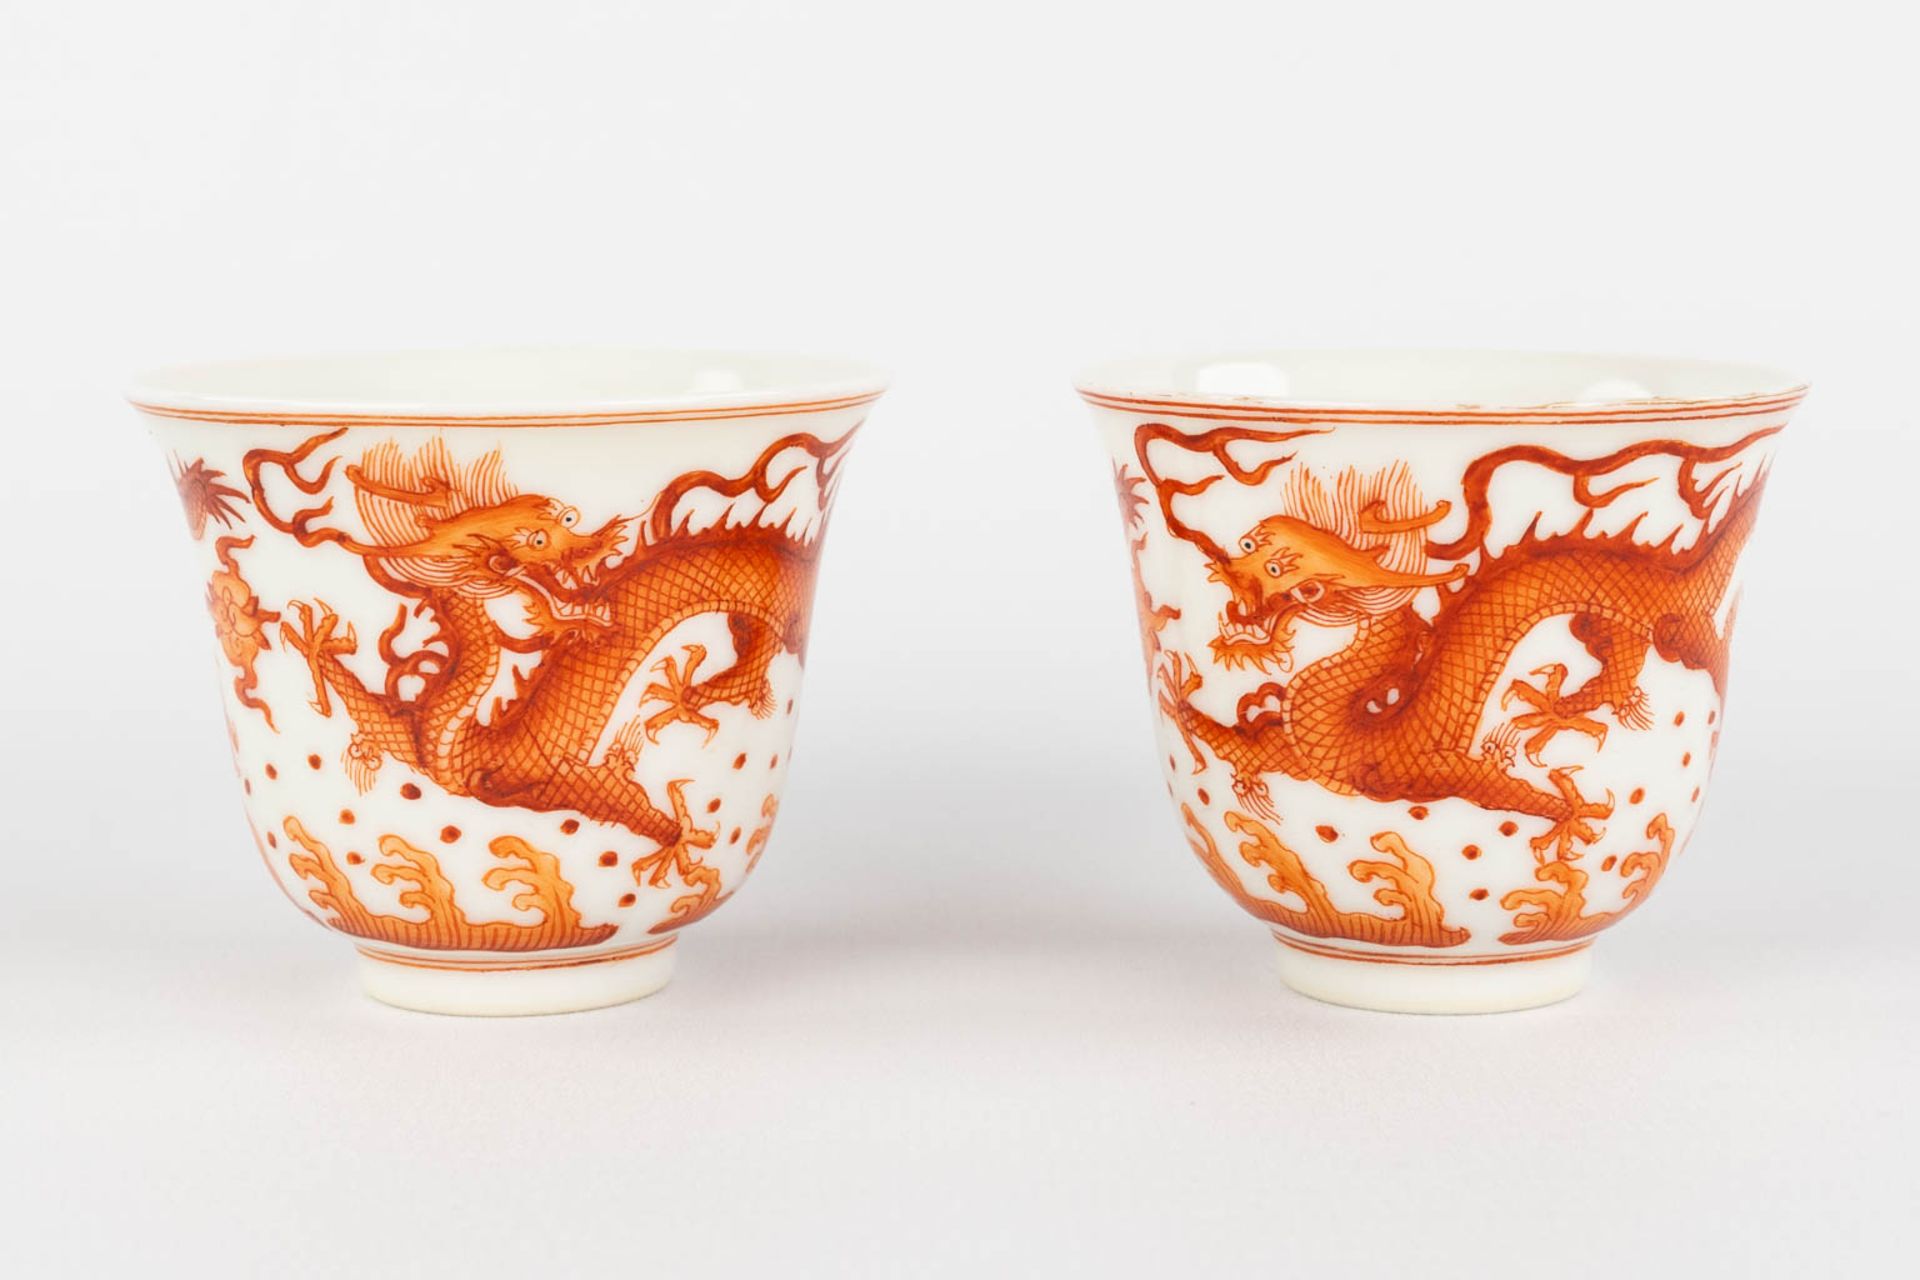 A pair of Chinese teacups, red dragon decor, Guangxu mark and period. (D:6 x H:5 cm)